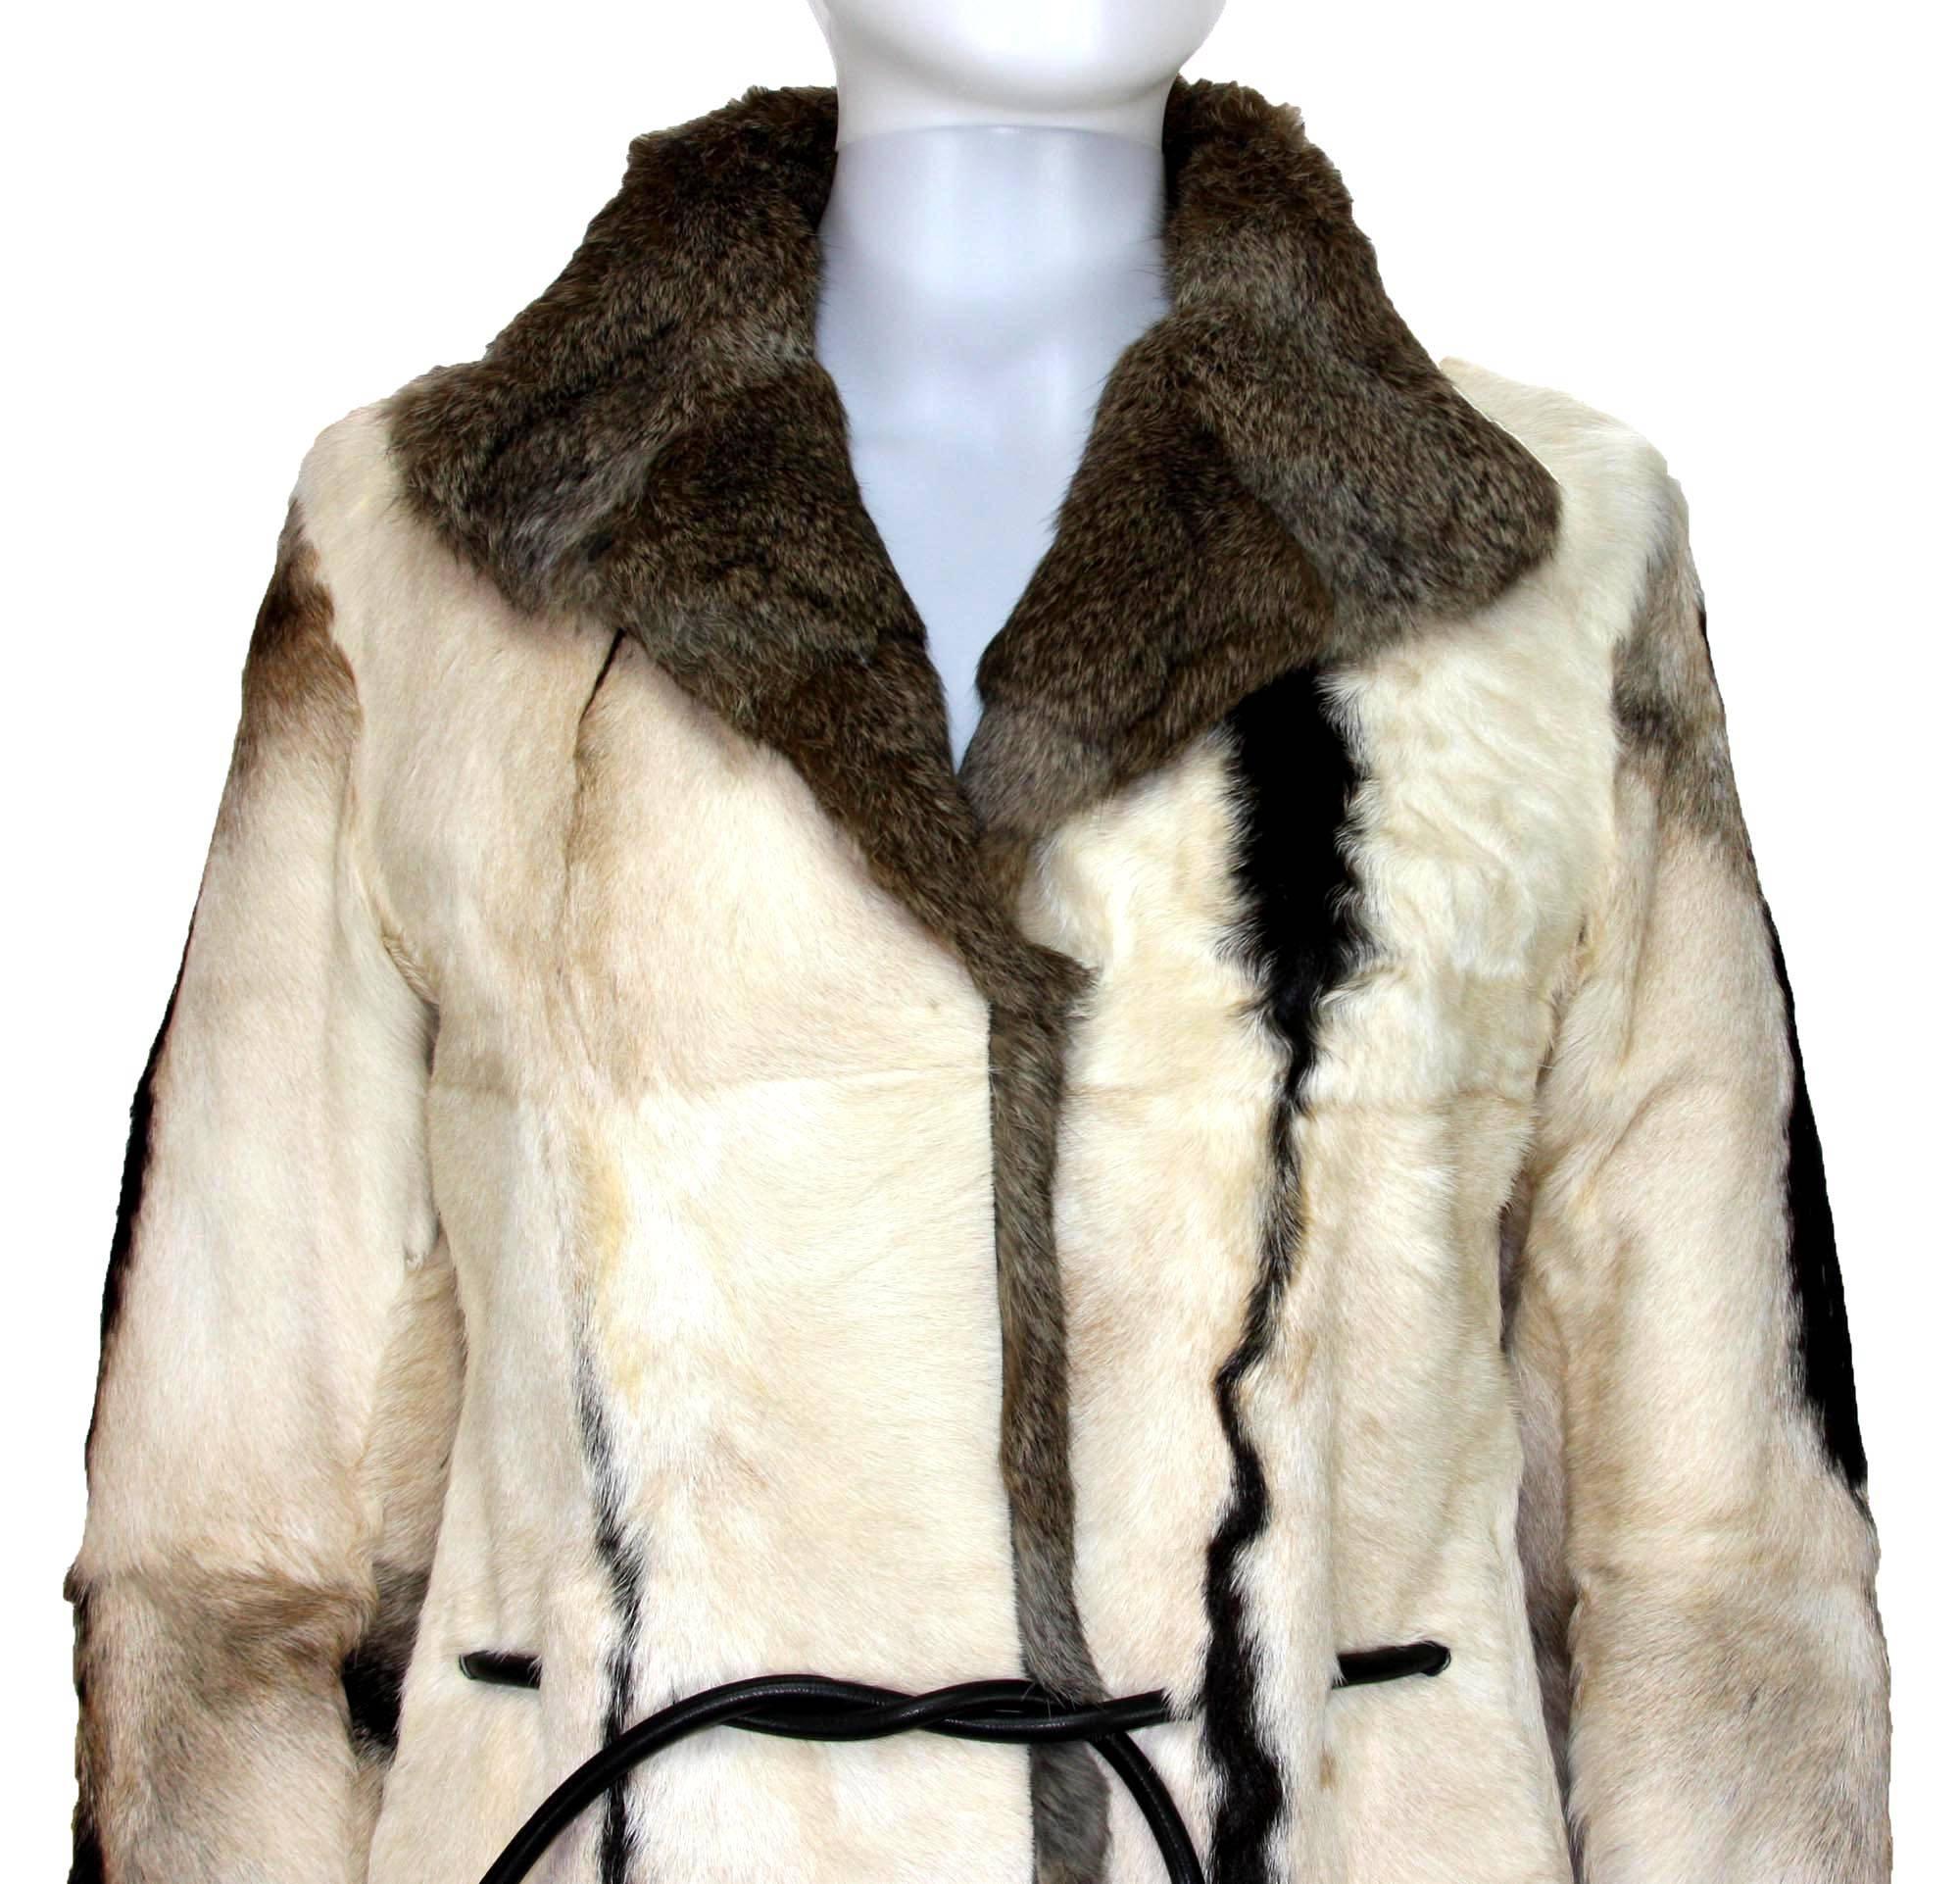 Tom Ford for Gucci Reversible Beige Fur Coat It.40 1